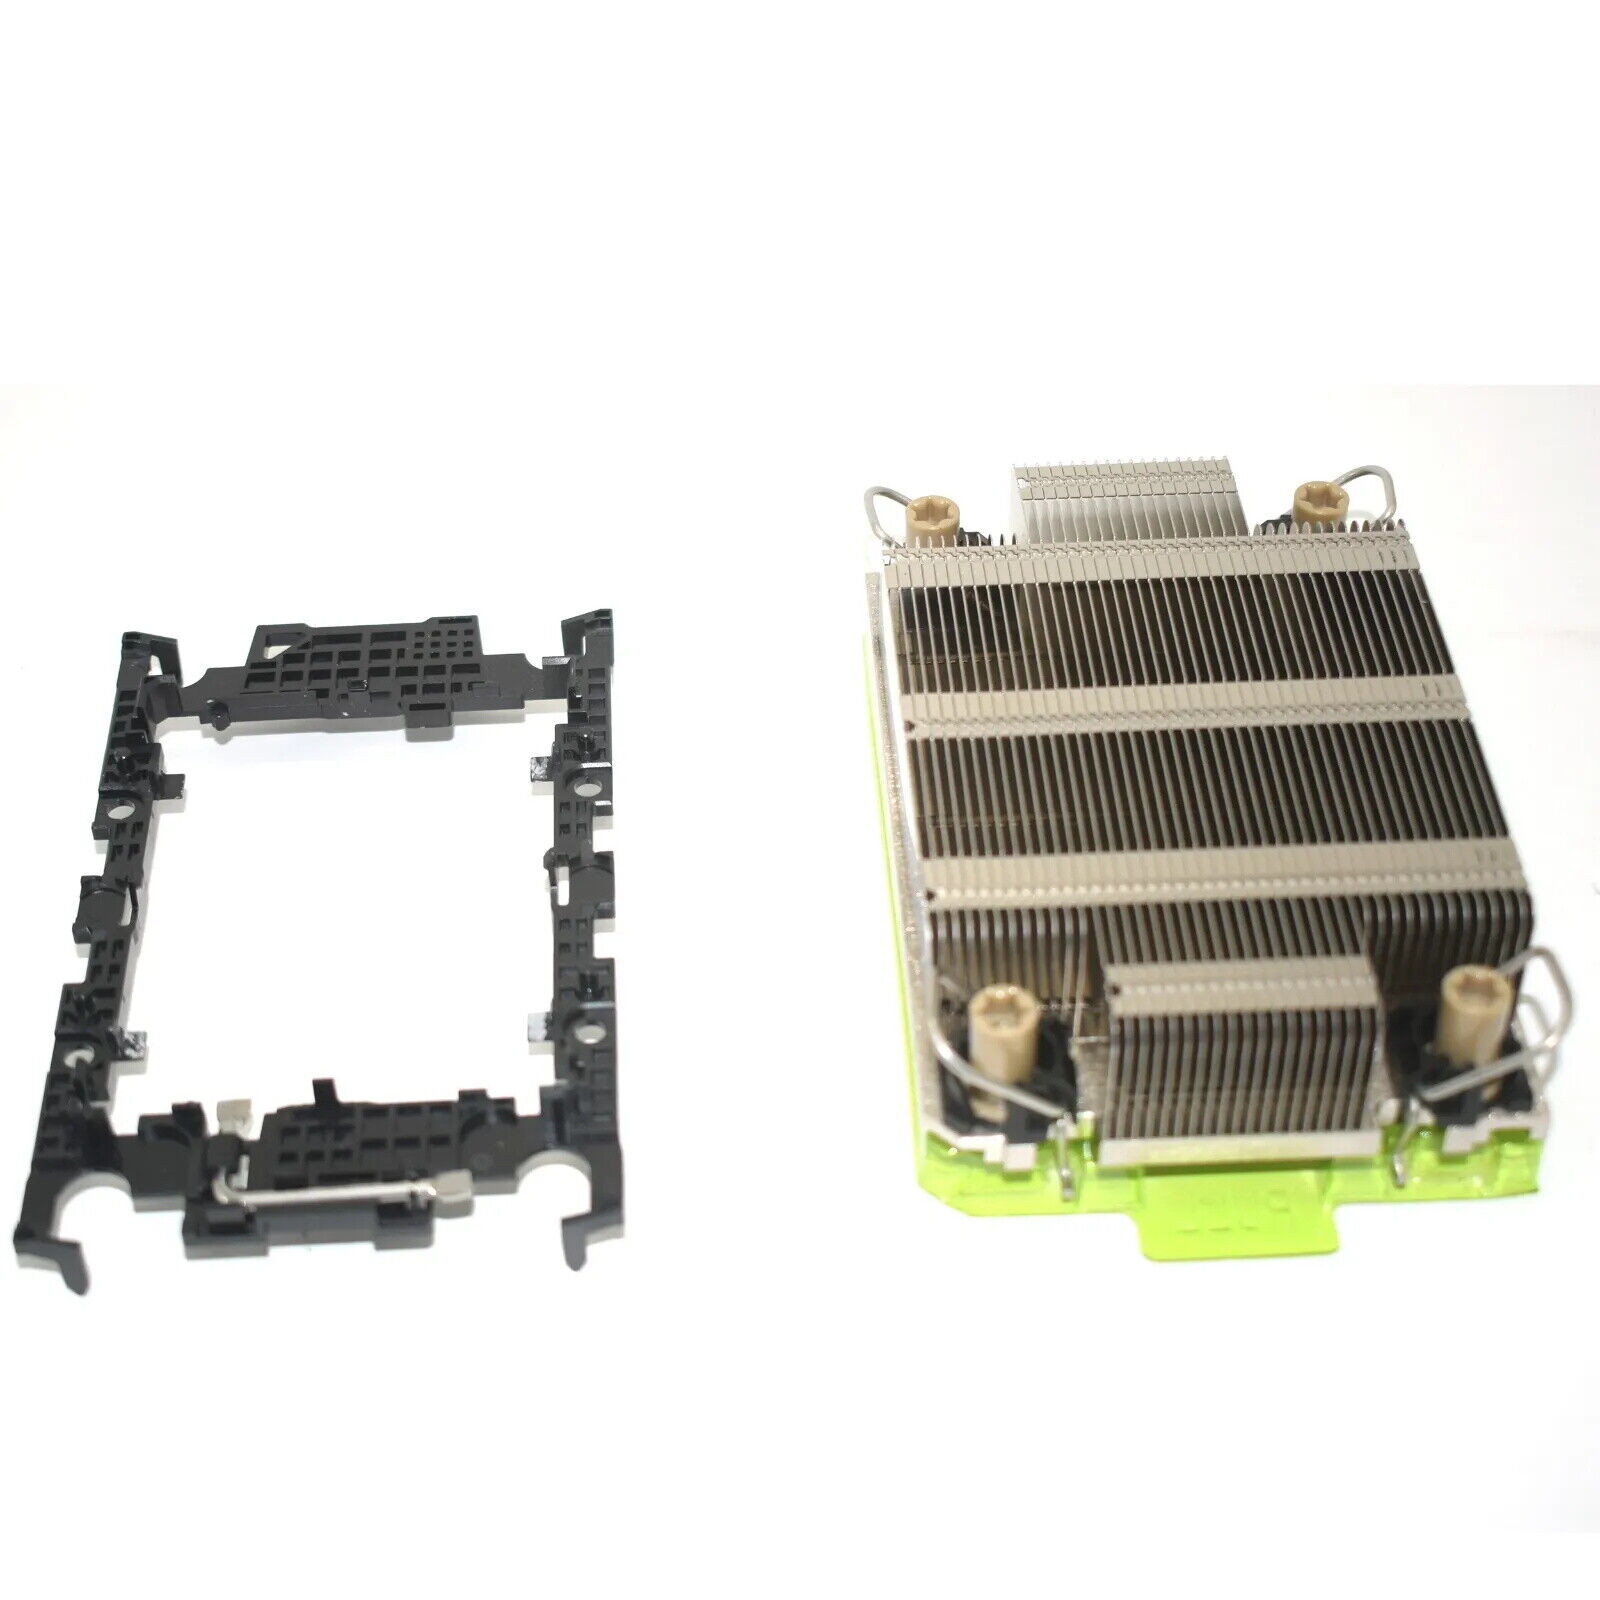 New For Dell PowerEdge R760 CPU Heatsink with Cage 3WKXR 03WKXR